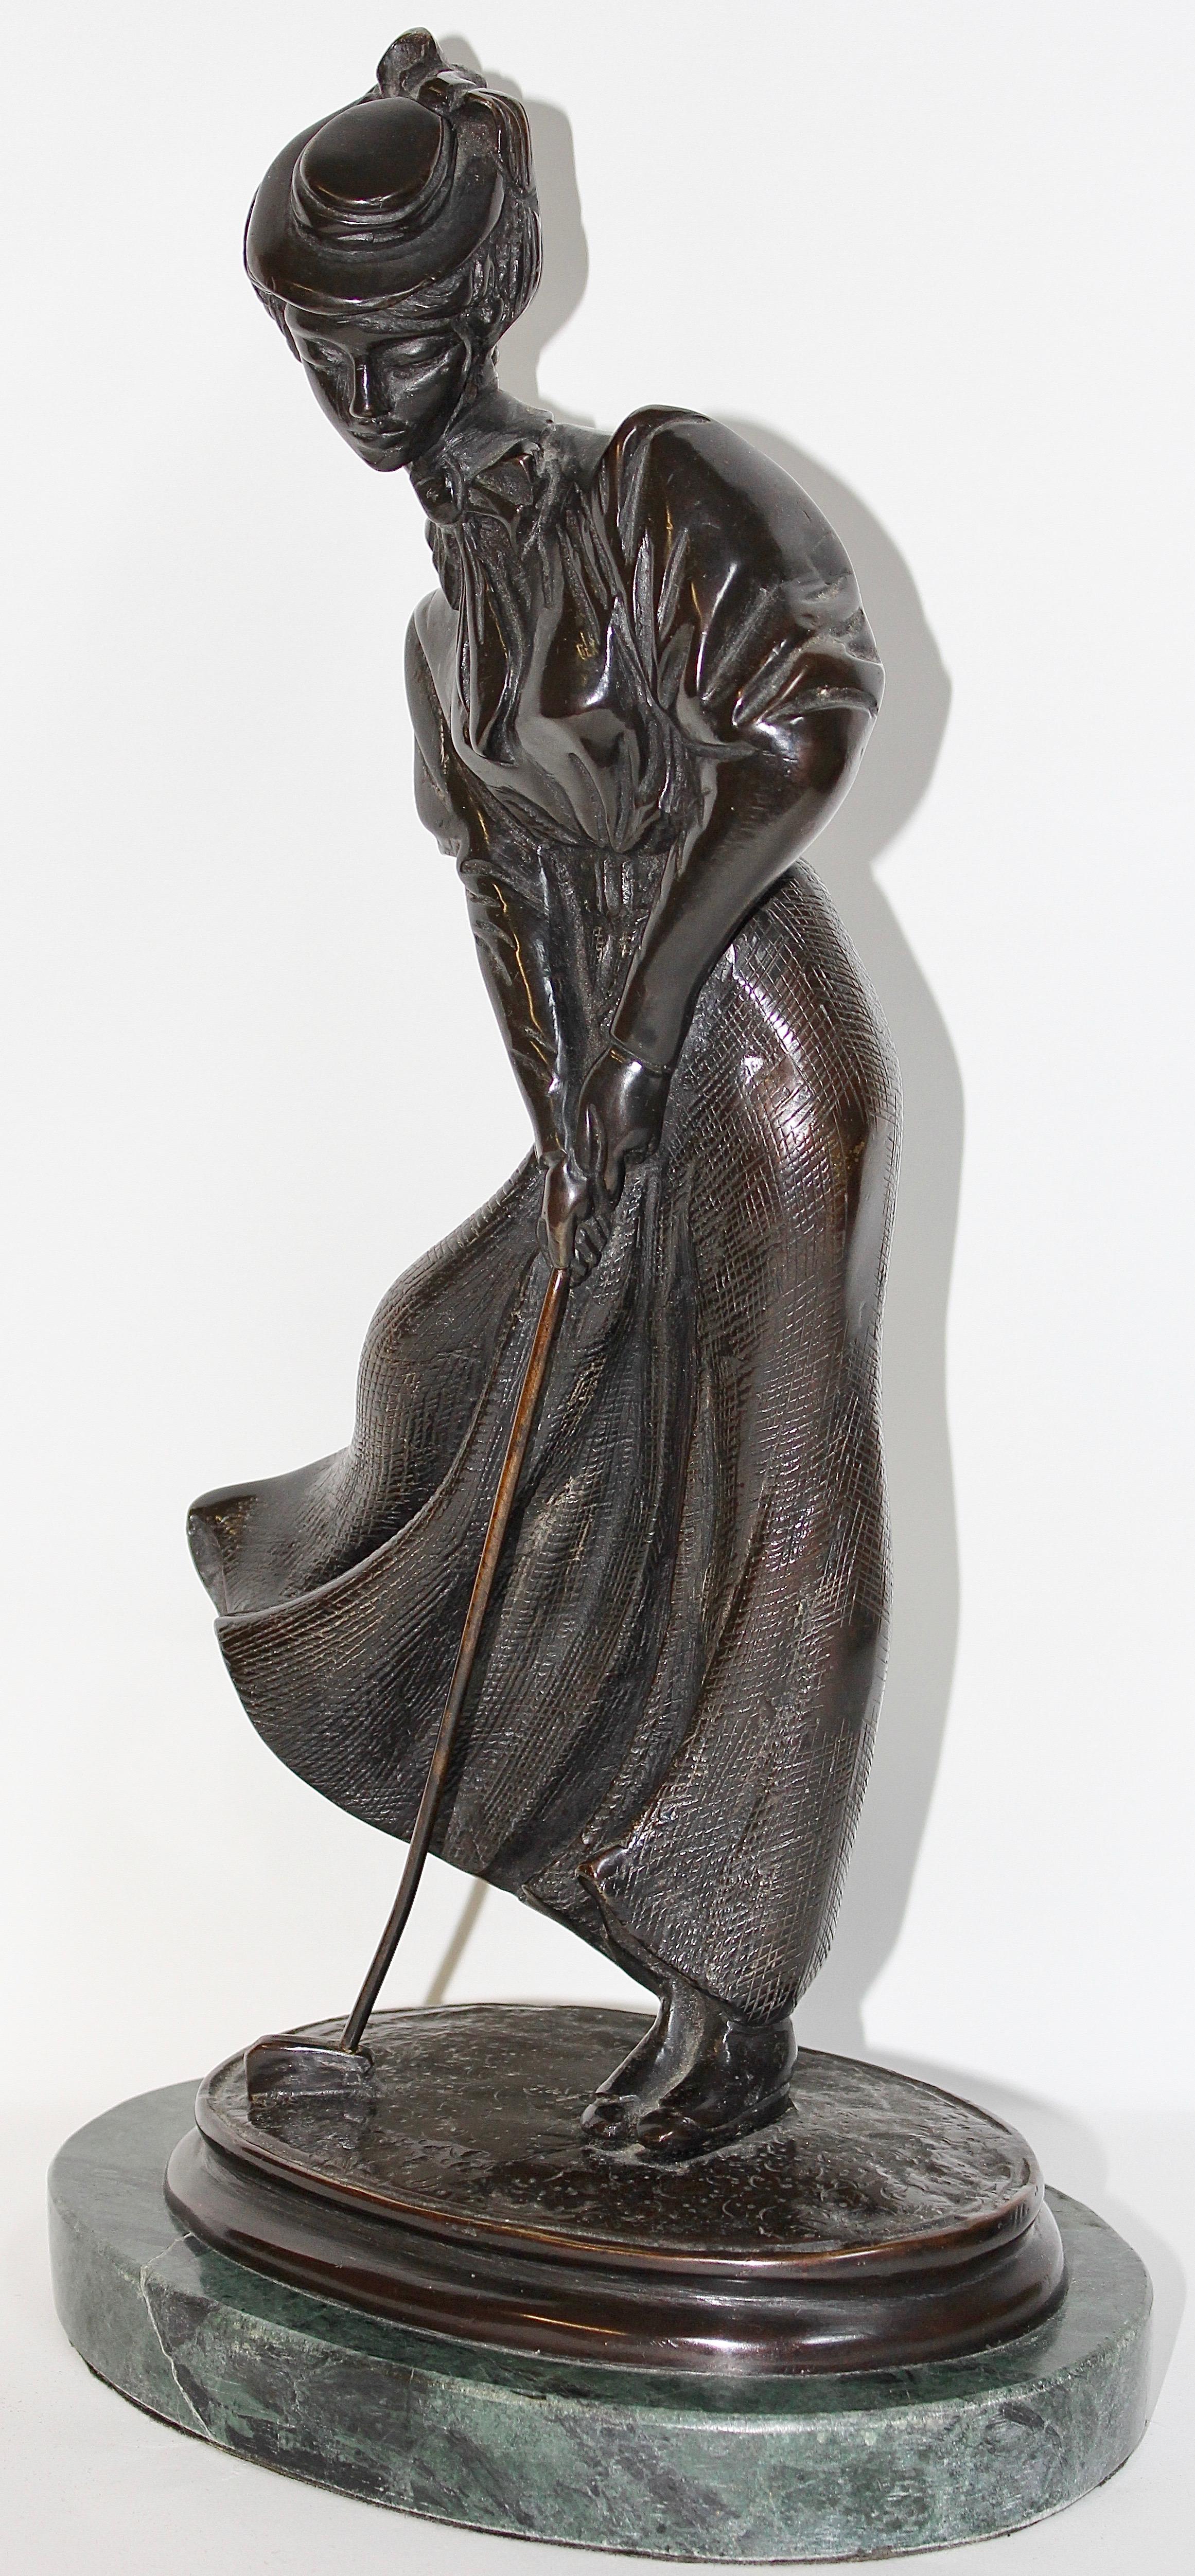 Pretty and decorative antique bronze sculpture.
Elegant lady playing golf.
Bronze on marble base.
Very detailed quality.